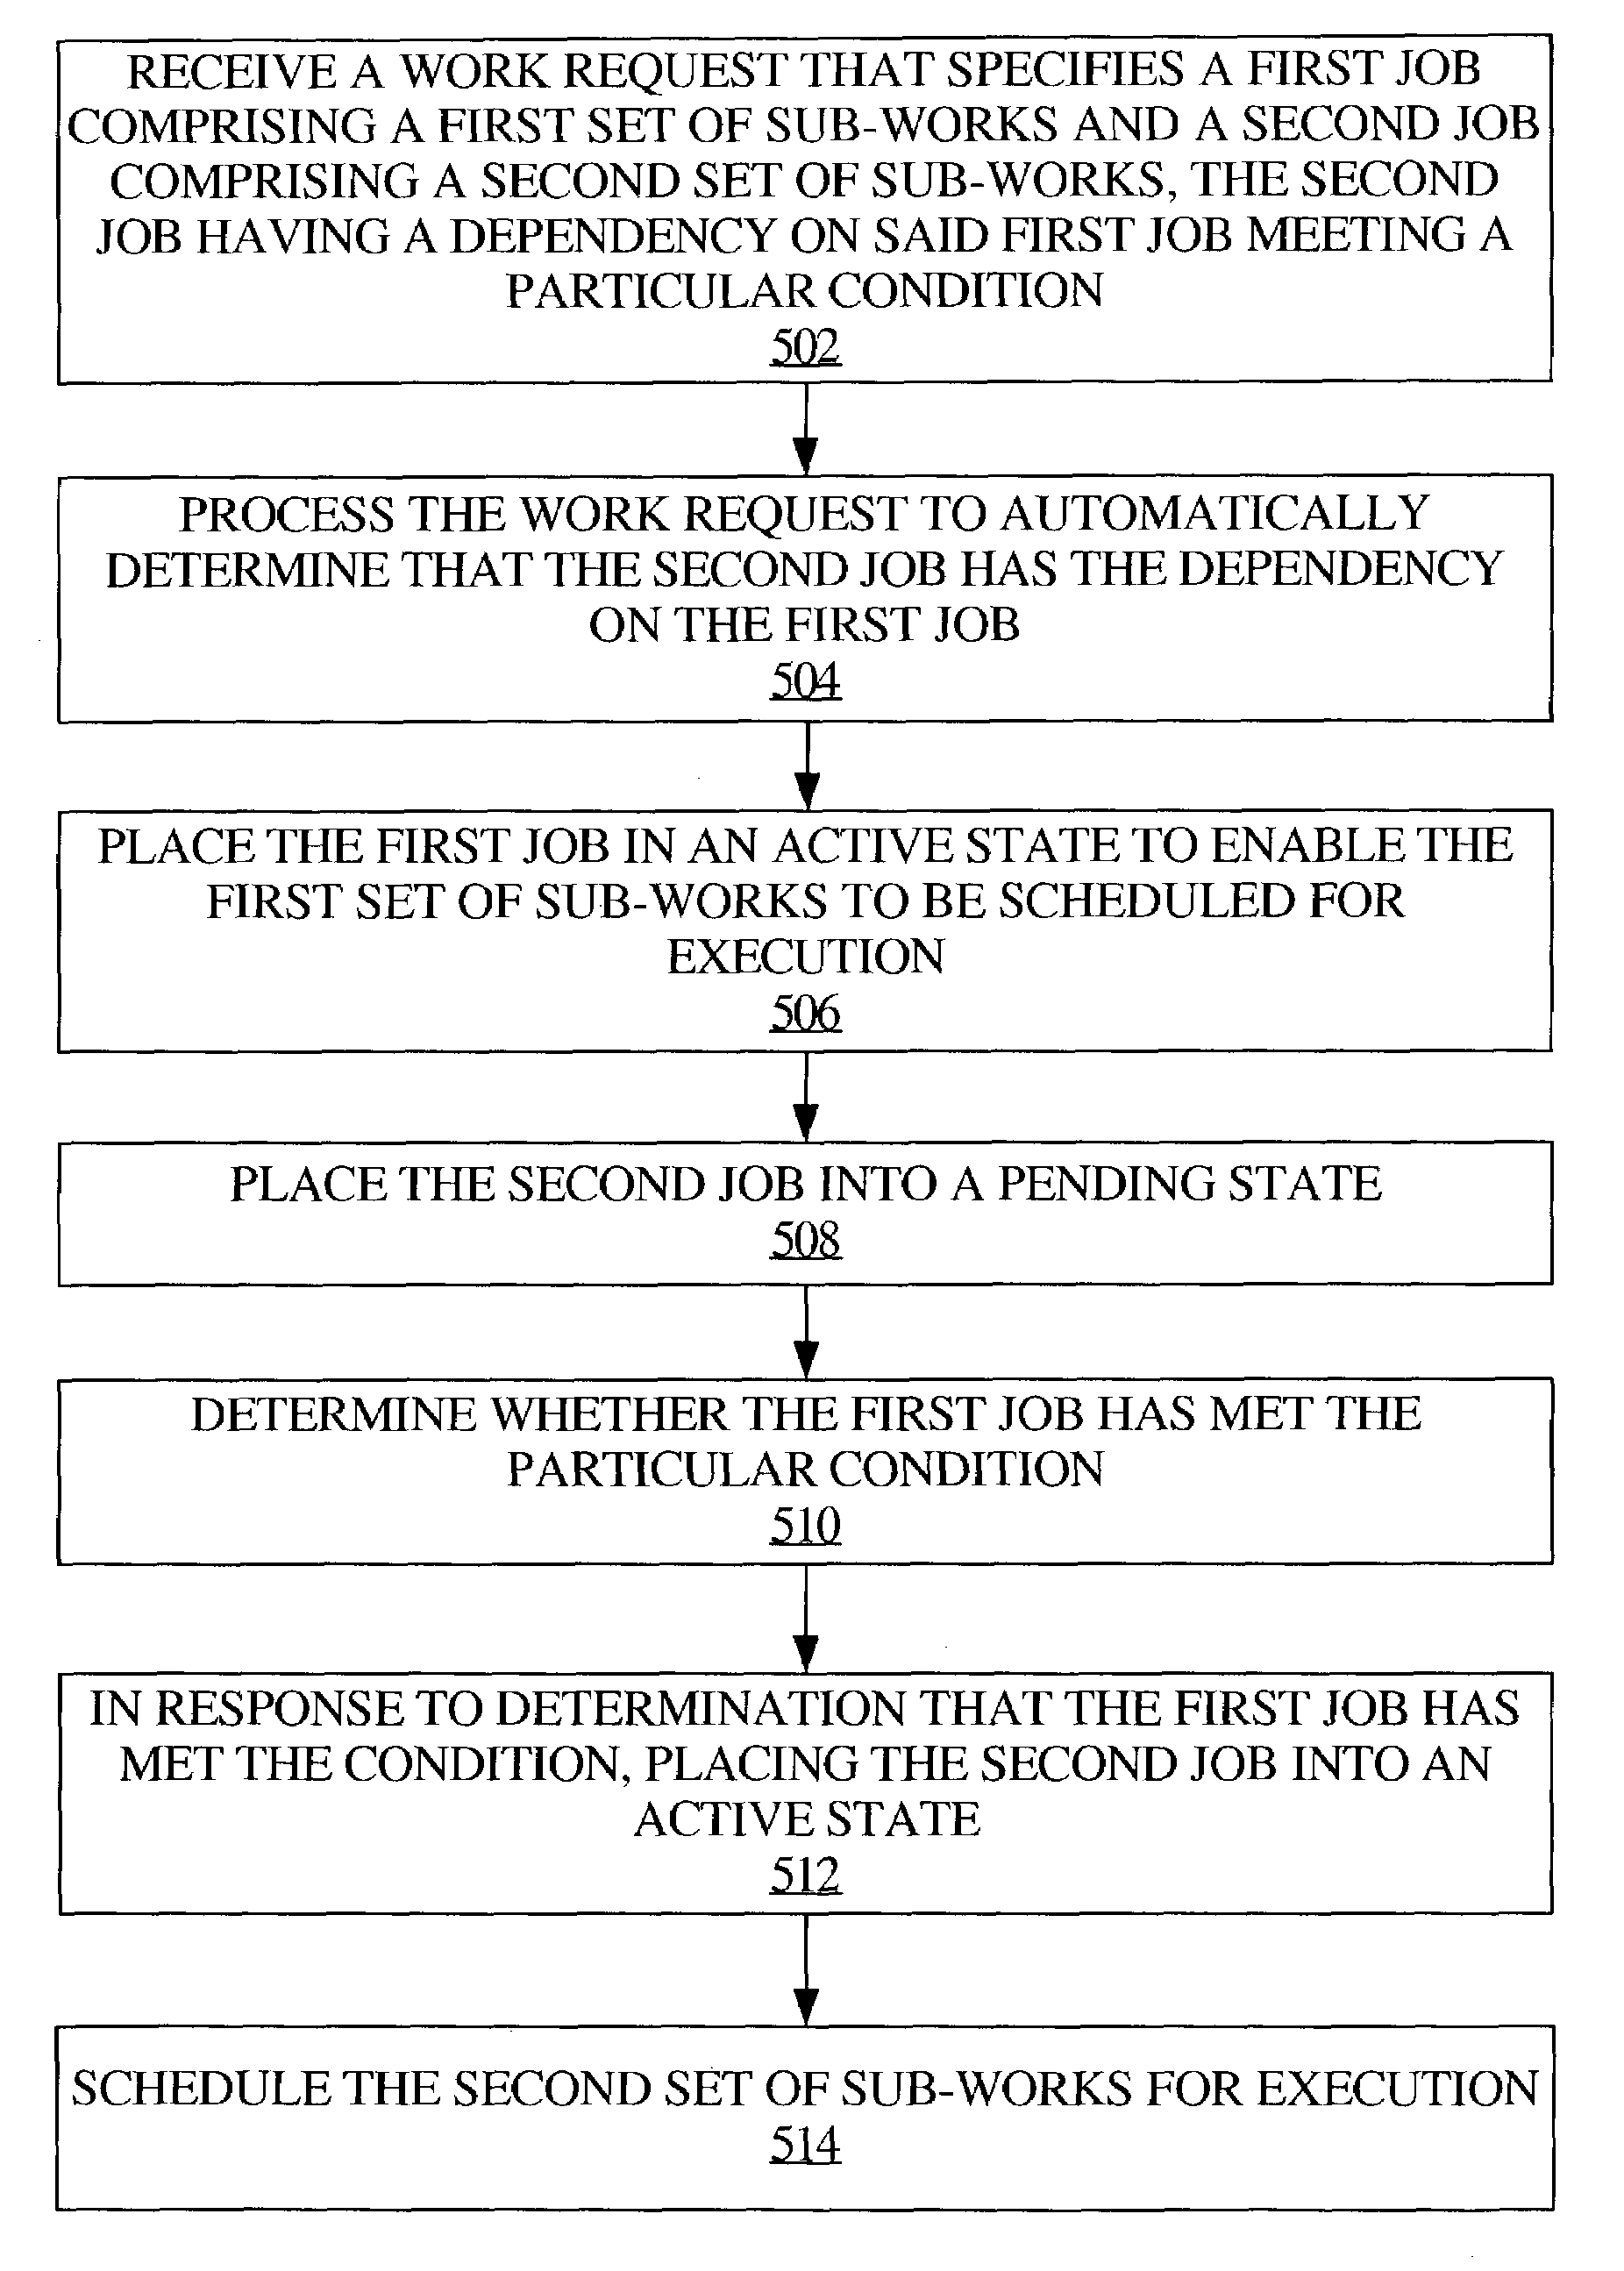 Hierarchically structured logging for computer work processing